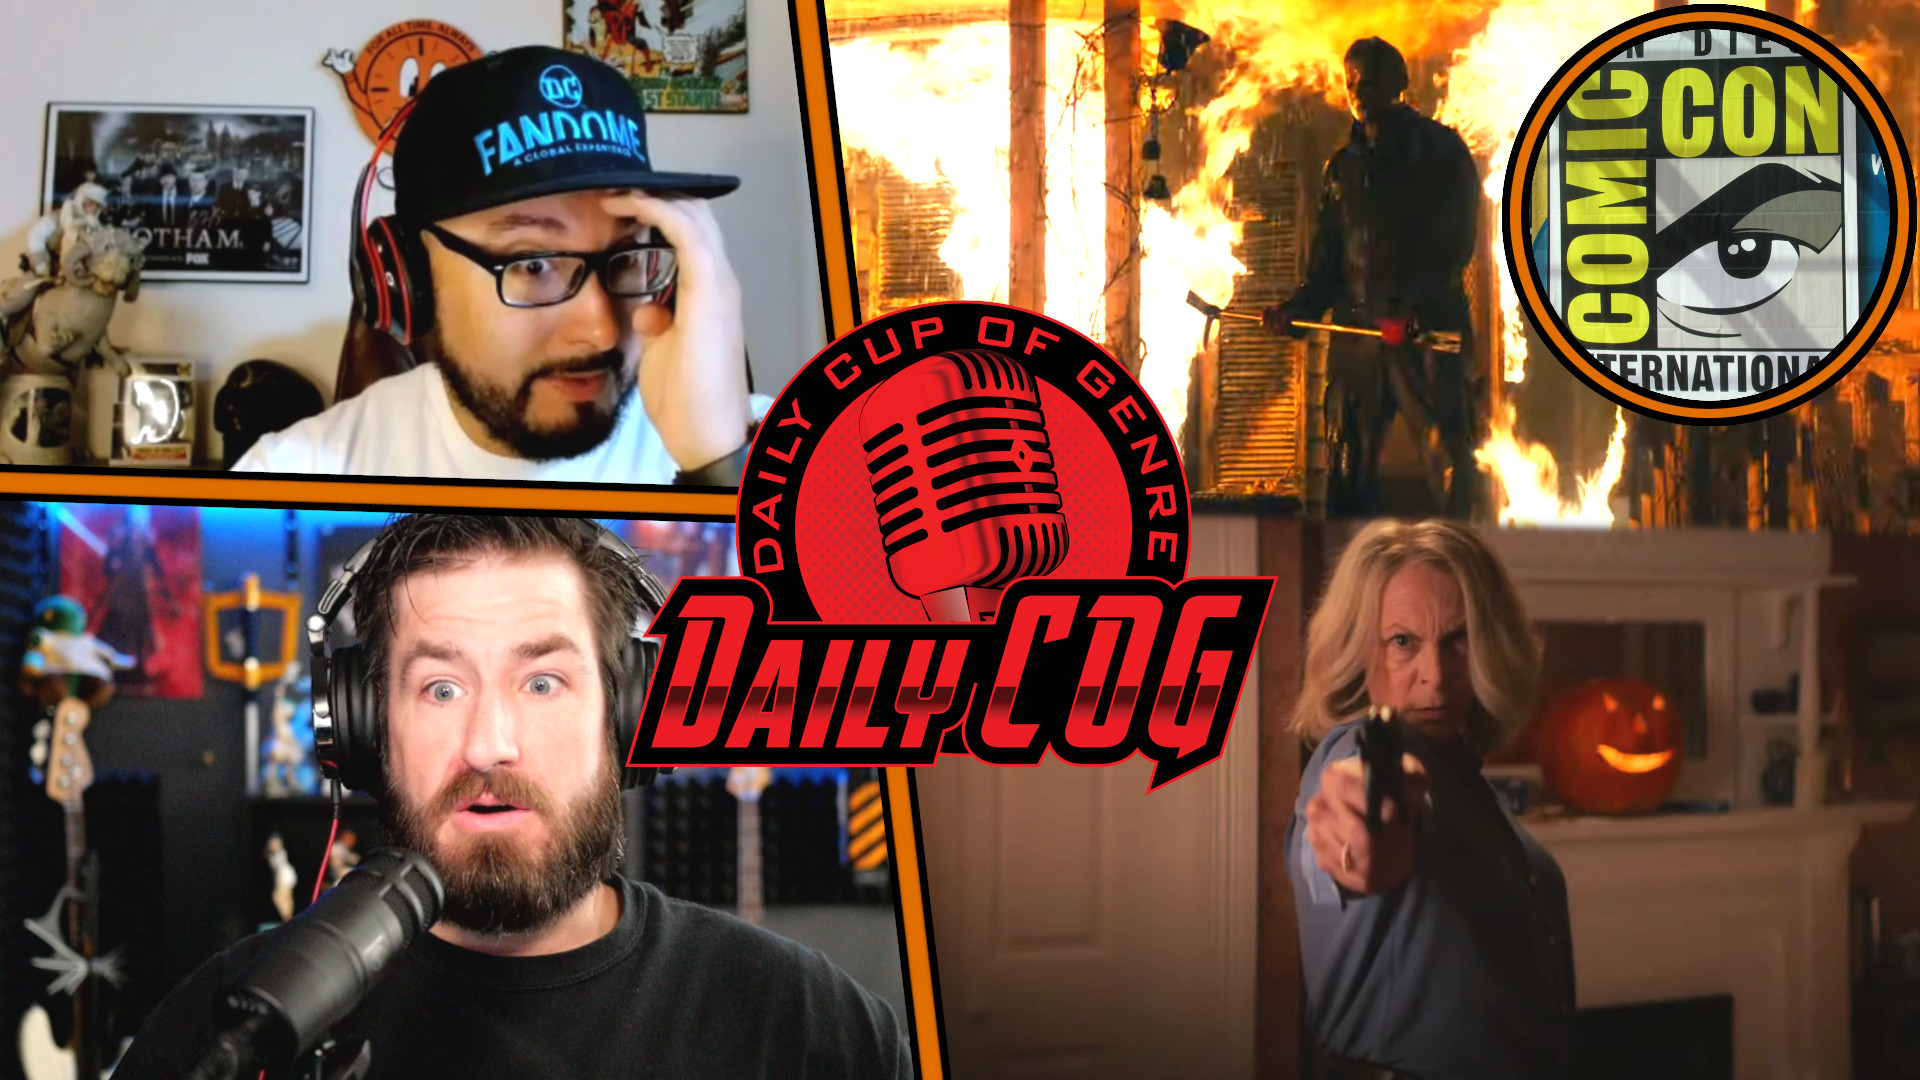 Thumbnail For Daily COG Podcast featuring Images of the hosts reacting to the Halloween Ends Trailer. Images of Laurie and Michael Meyers from Halloween Ends are shown. A SDCC Logo is also present